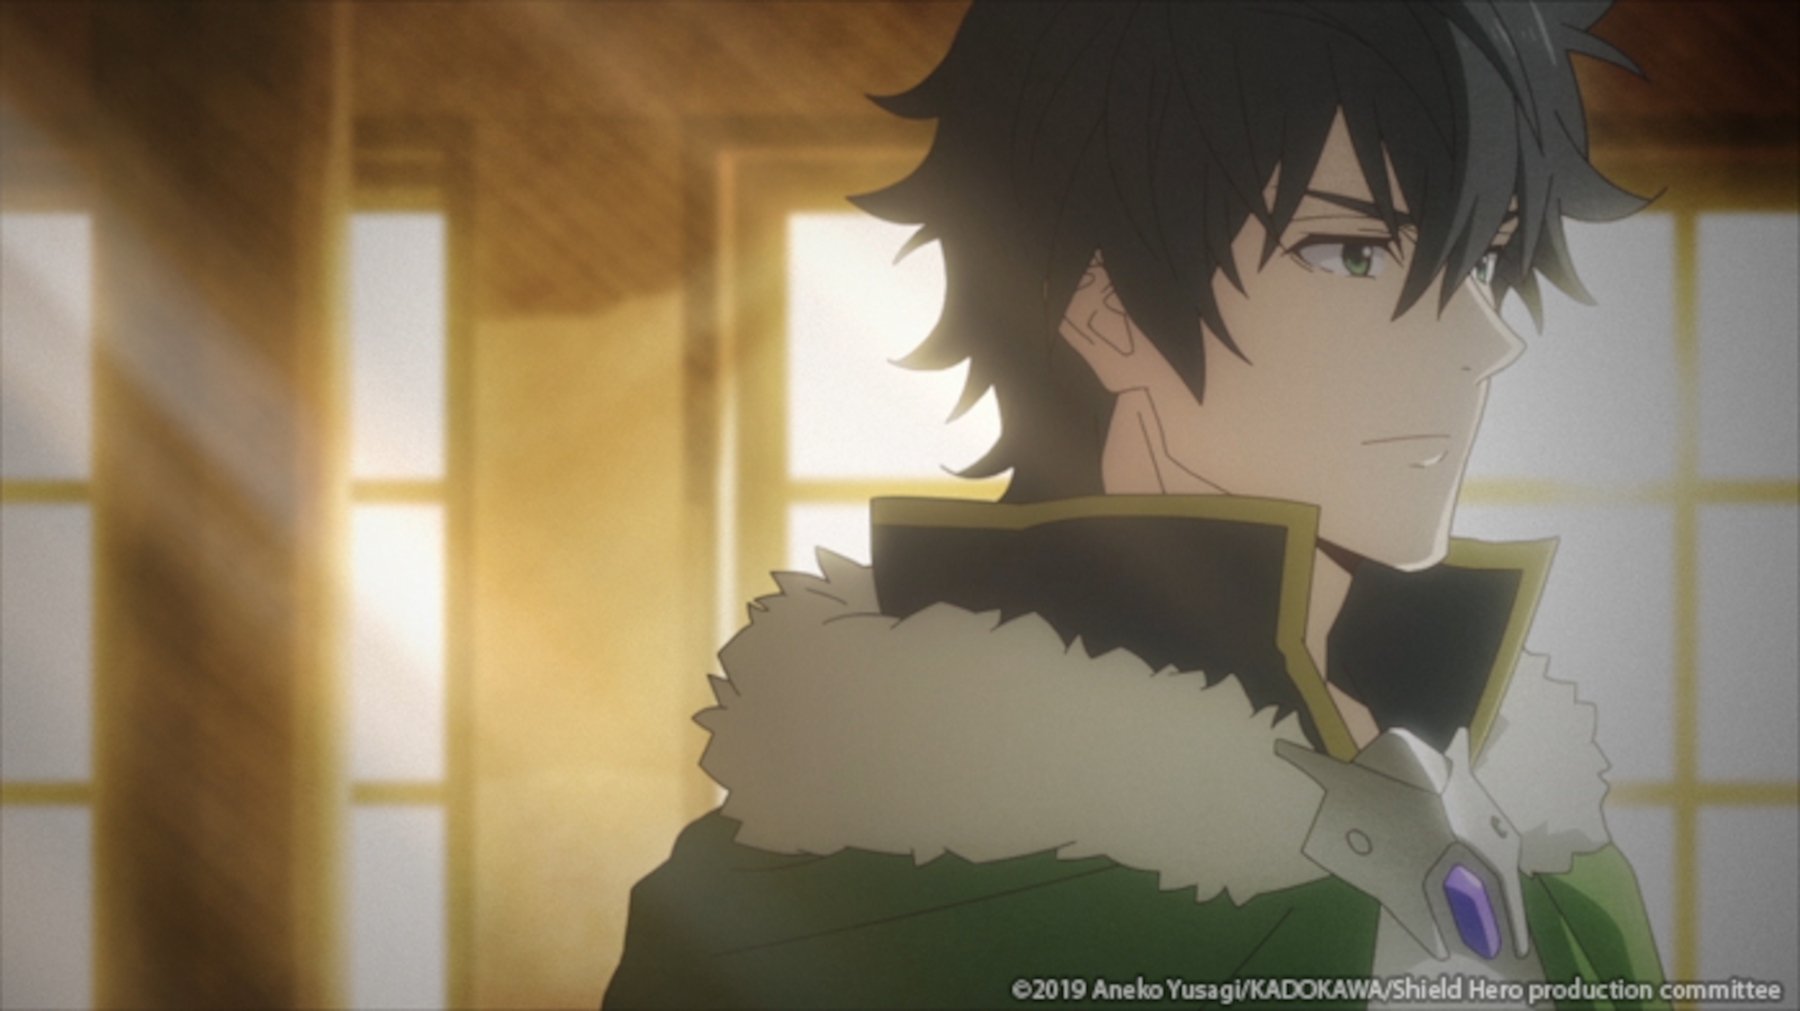 Naofumi Iwatani in 'The Rising of the Shield Hero.' He's wearing a green cloak with white fur on the top.